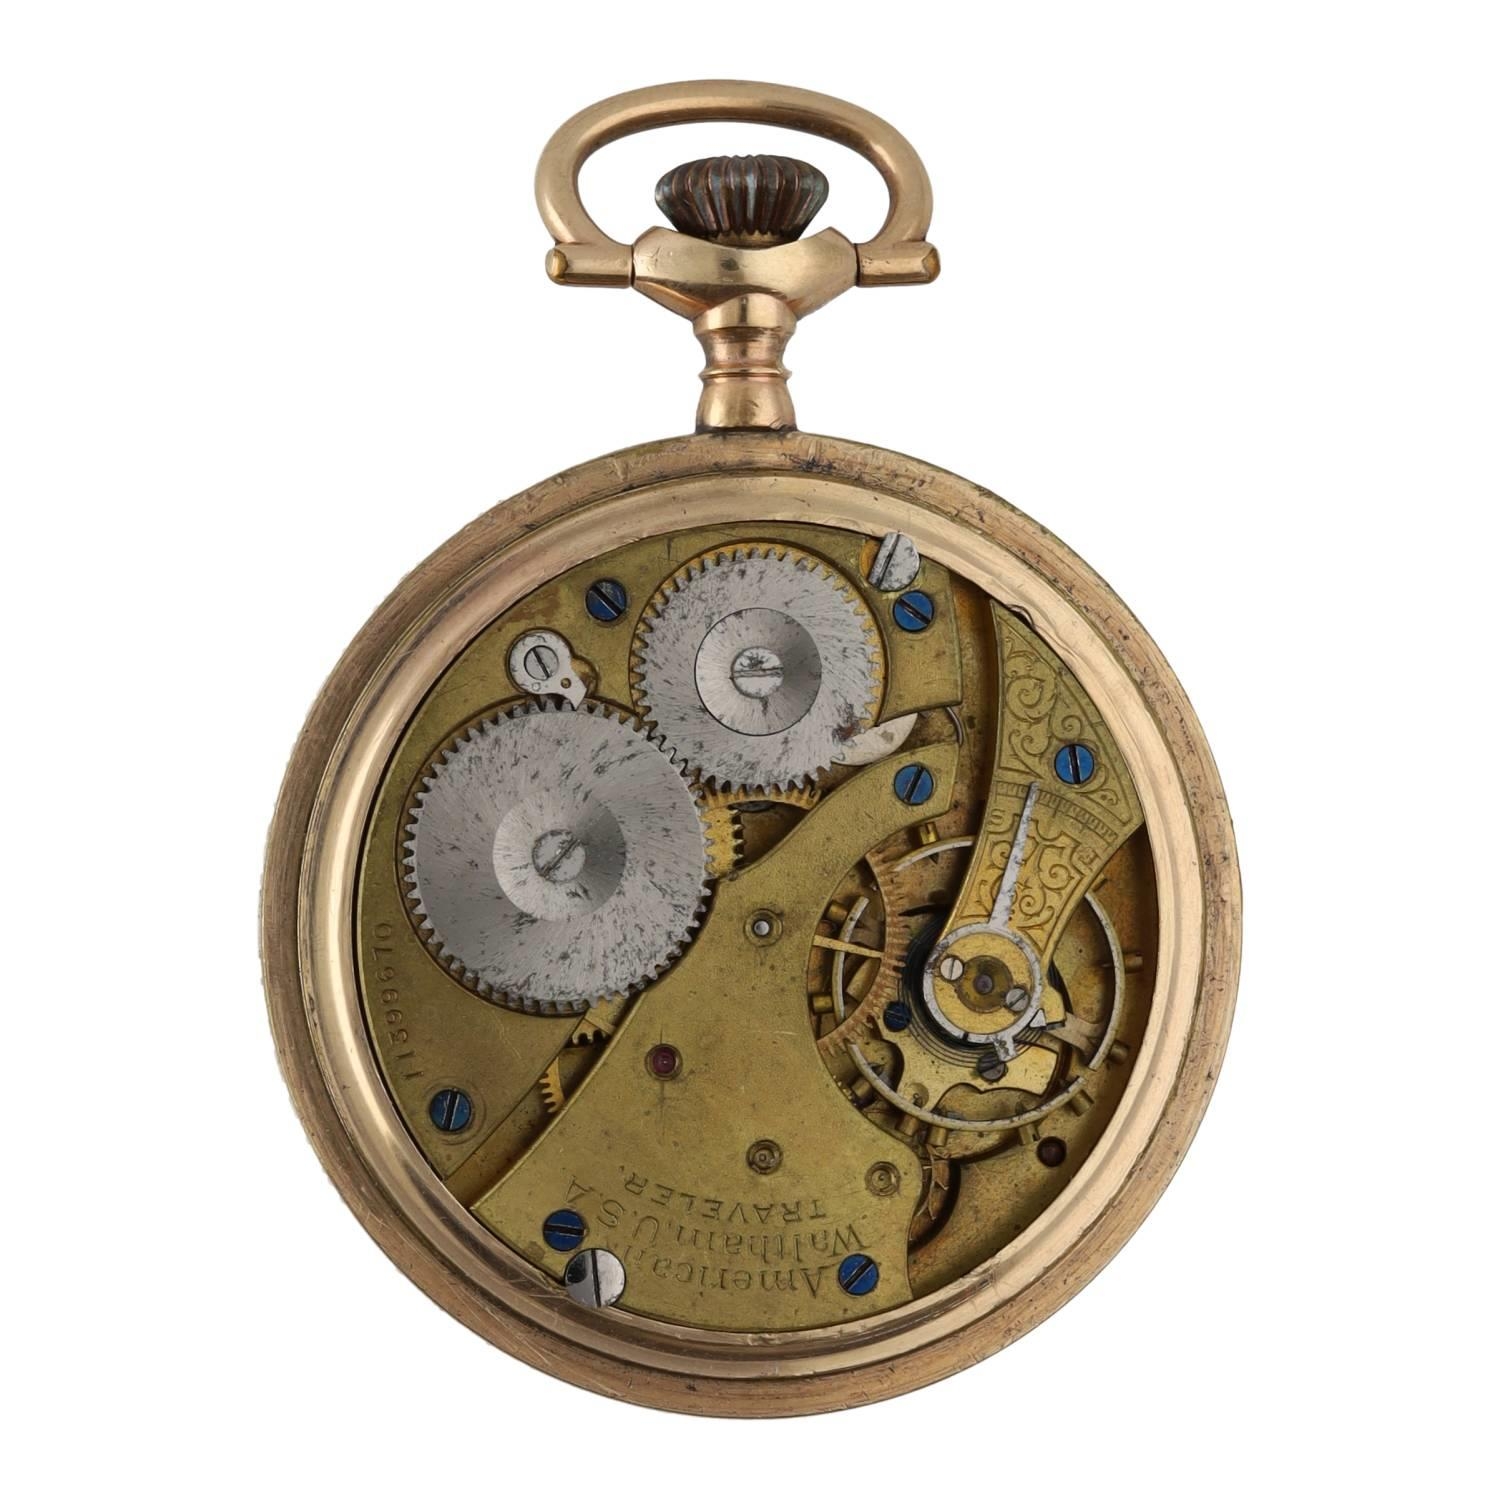 American Waltham 'Traveler' gold plated lever pocket watch, circa 1902, serial no. 11399670, - Image 3 of 4